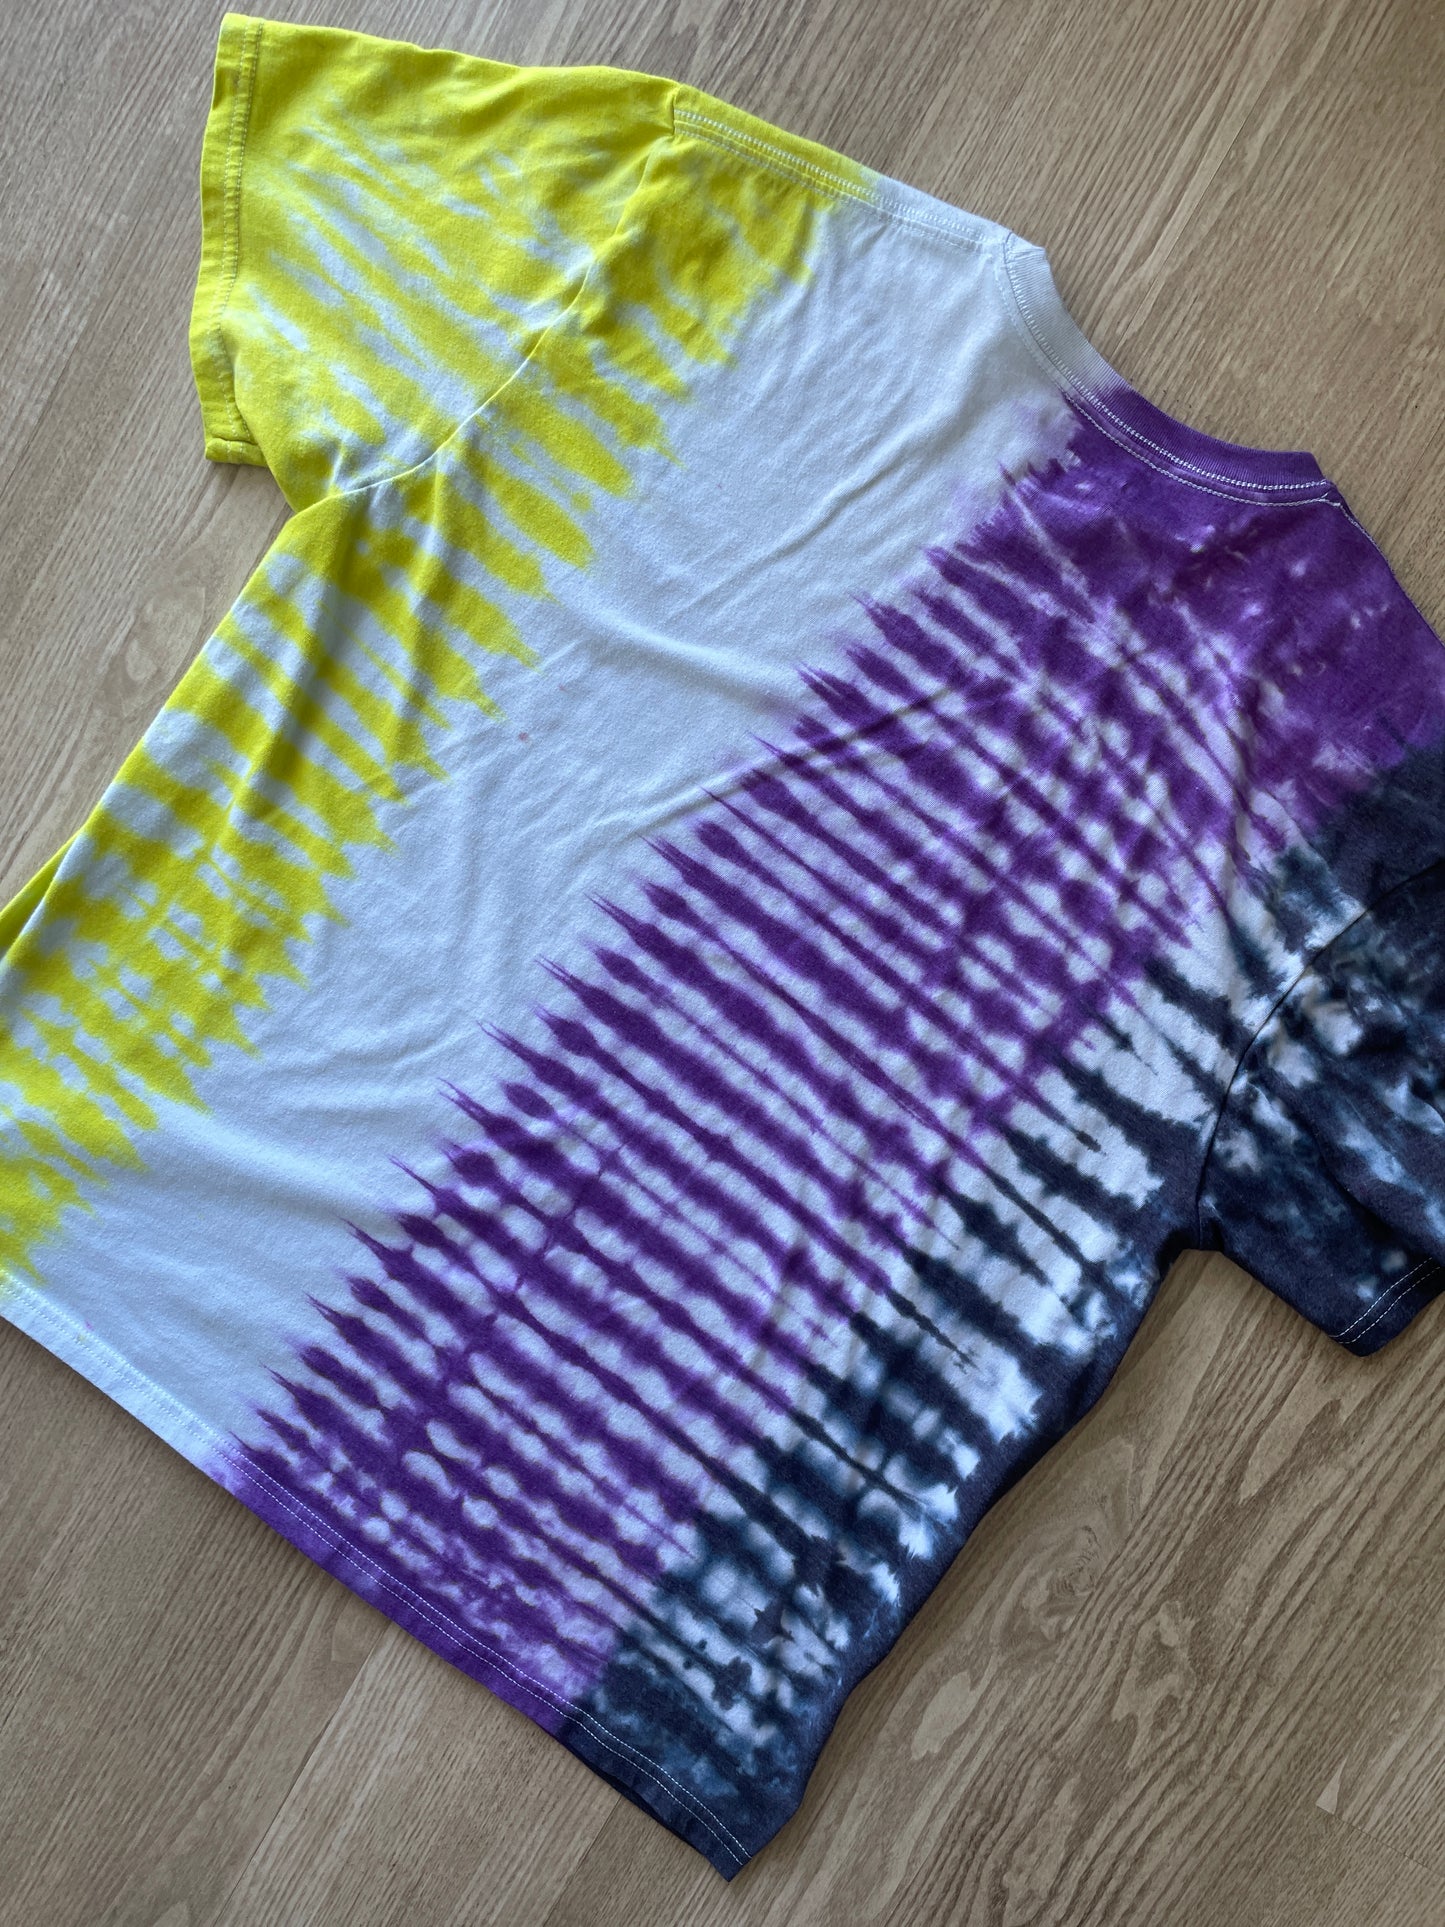 2XL Men’s Non-Binary Pride Flag-Inspired Handmade Tie Dye T-Shirt | One-Of-a-Kind White, Yellow, Purple, and Black Short Sleeve